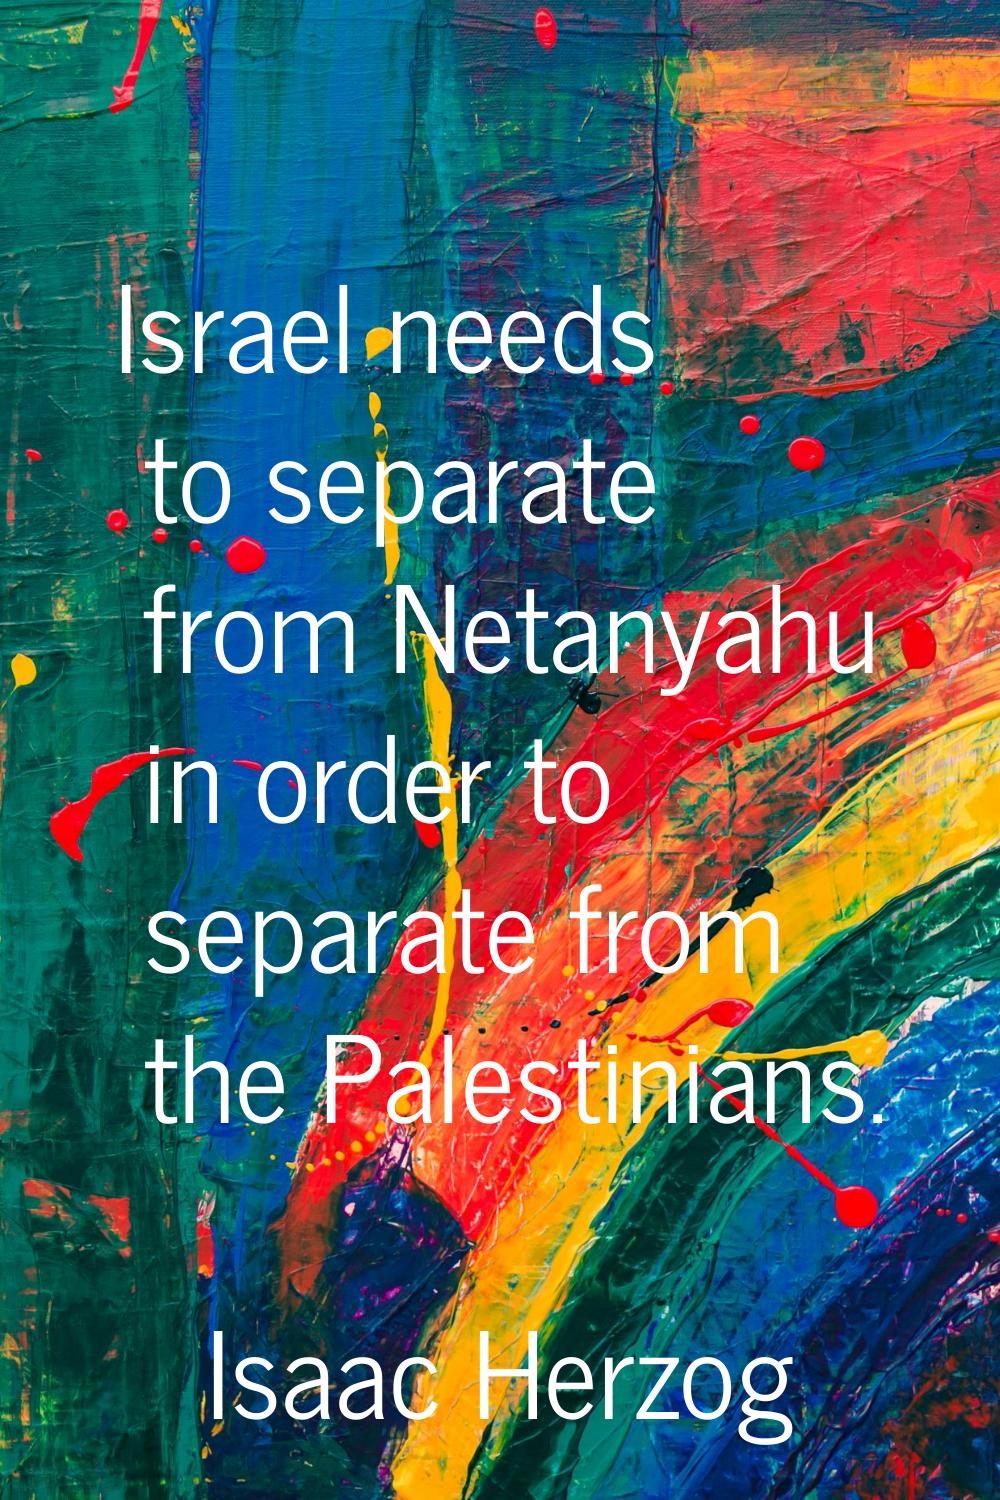 Israel needs to separate from Netanyahu in order to separate from the Palestinians.